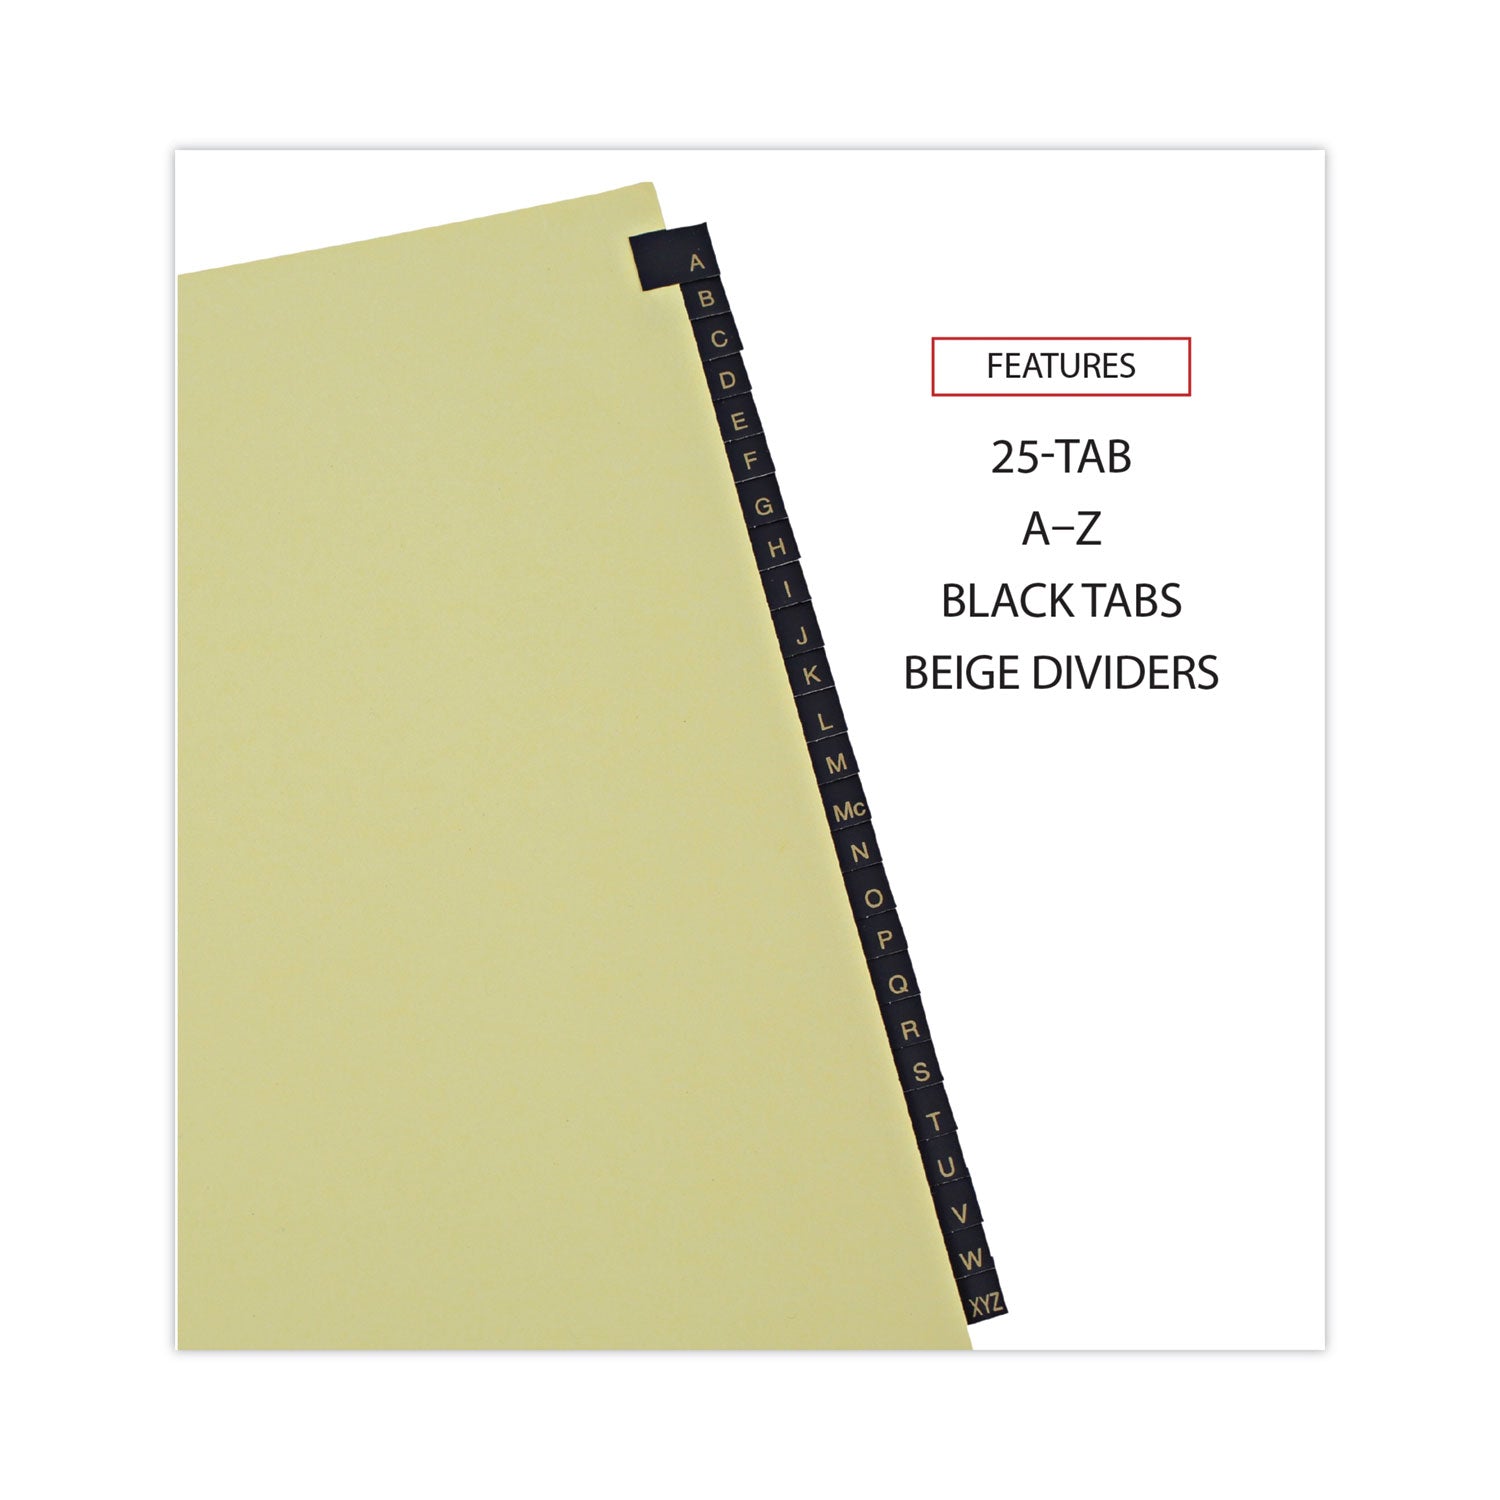 Deluxe Preprinted Simulated Leather Tab Dividers with Gold Printing, 25-Tab, A to Z, 11 x 8.5, Buff, 1 Set - 